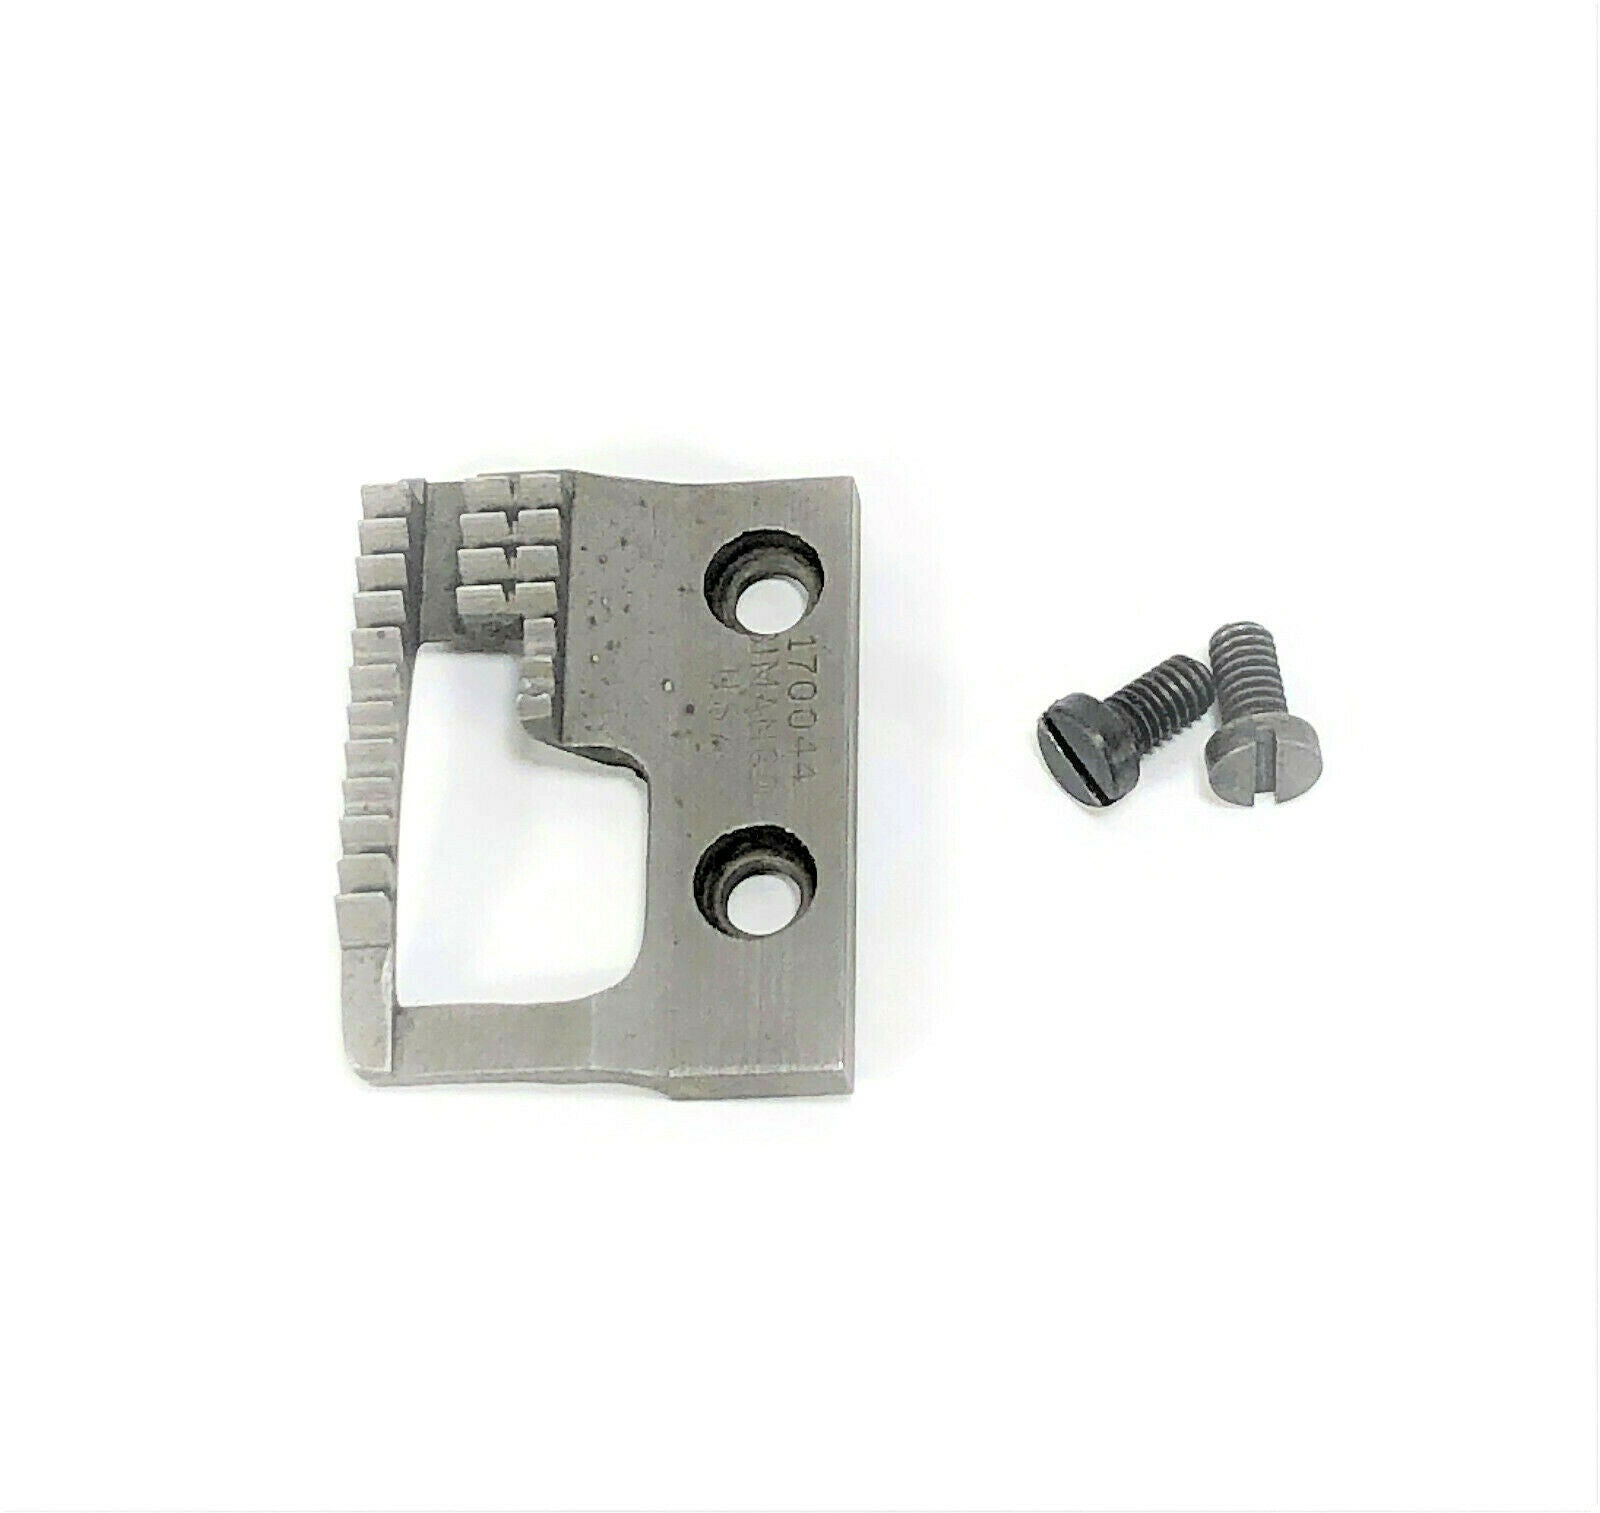 S52068001 Feed Dog Brother ZE855 Zigzag Sewing Machine Spare Parts